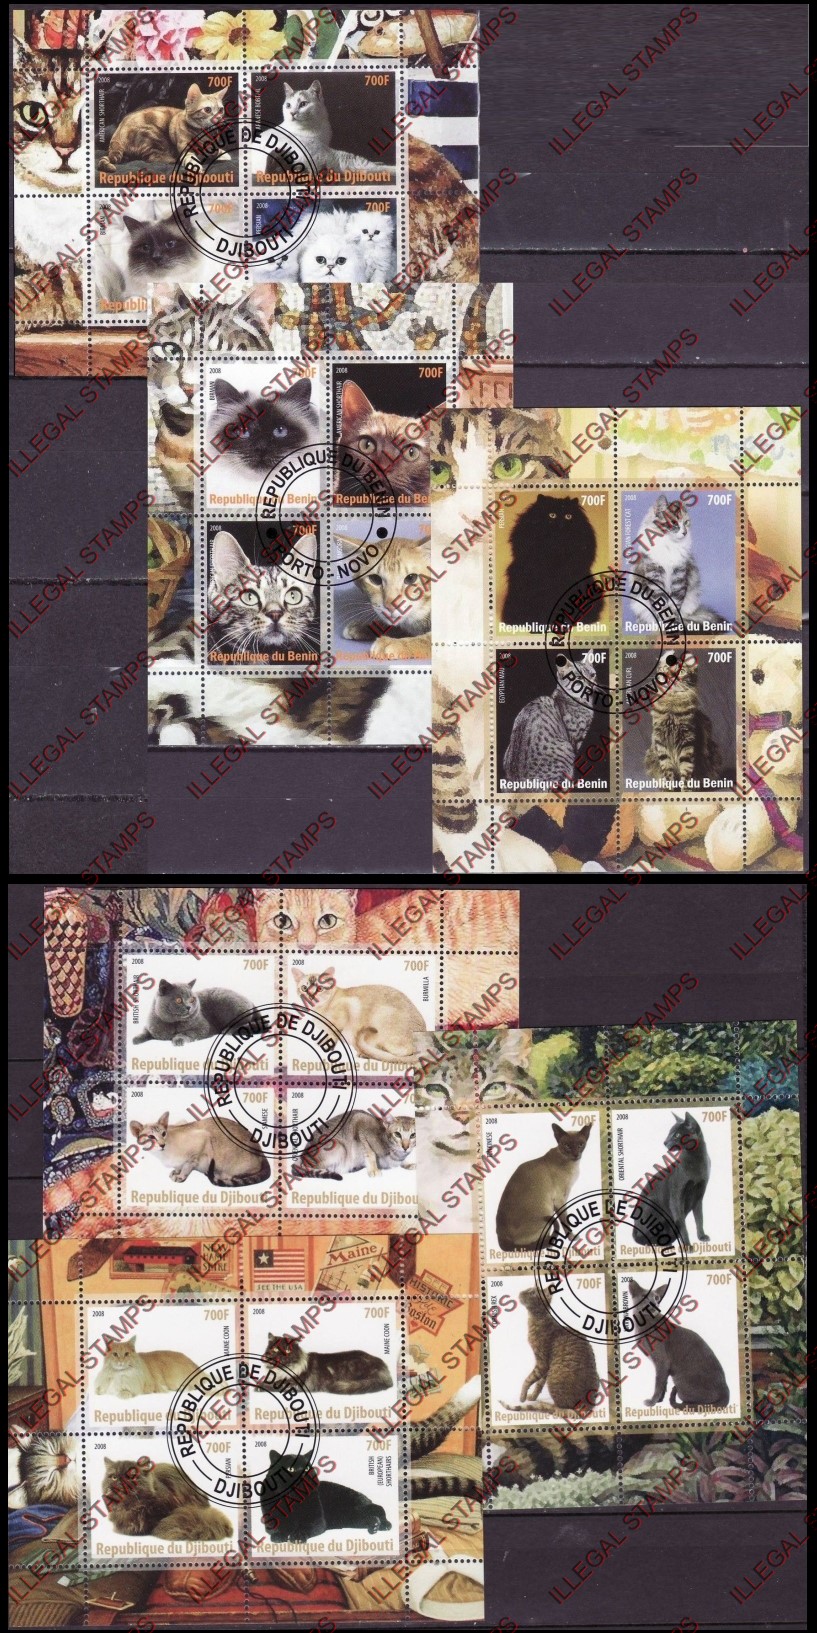 Djibouti 2008 Cats Illegal Stamp Souvenir Sheets of 4